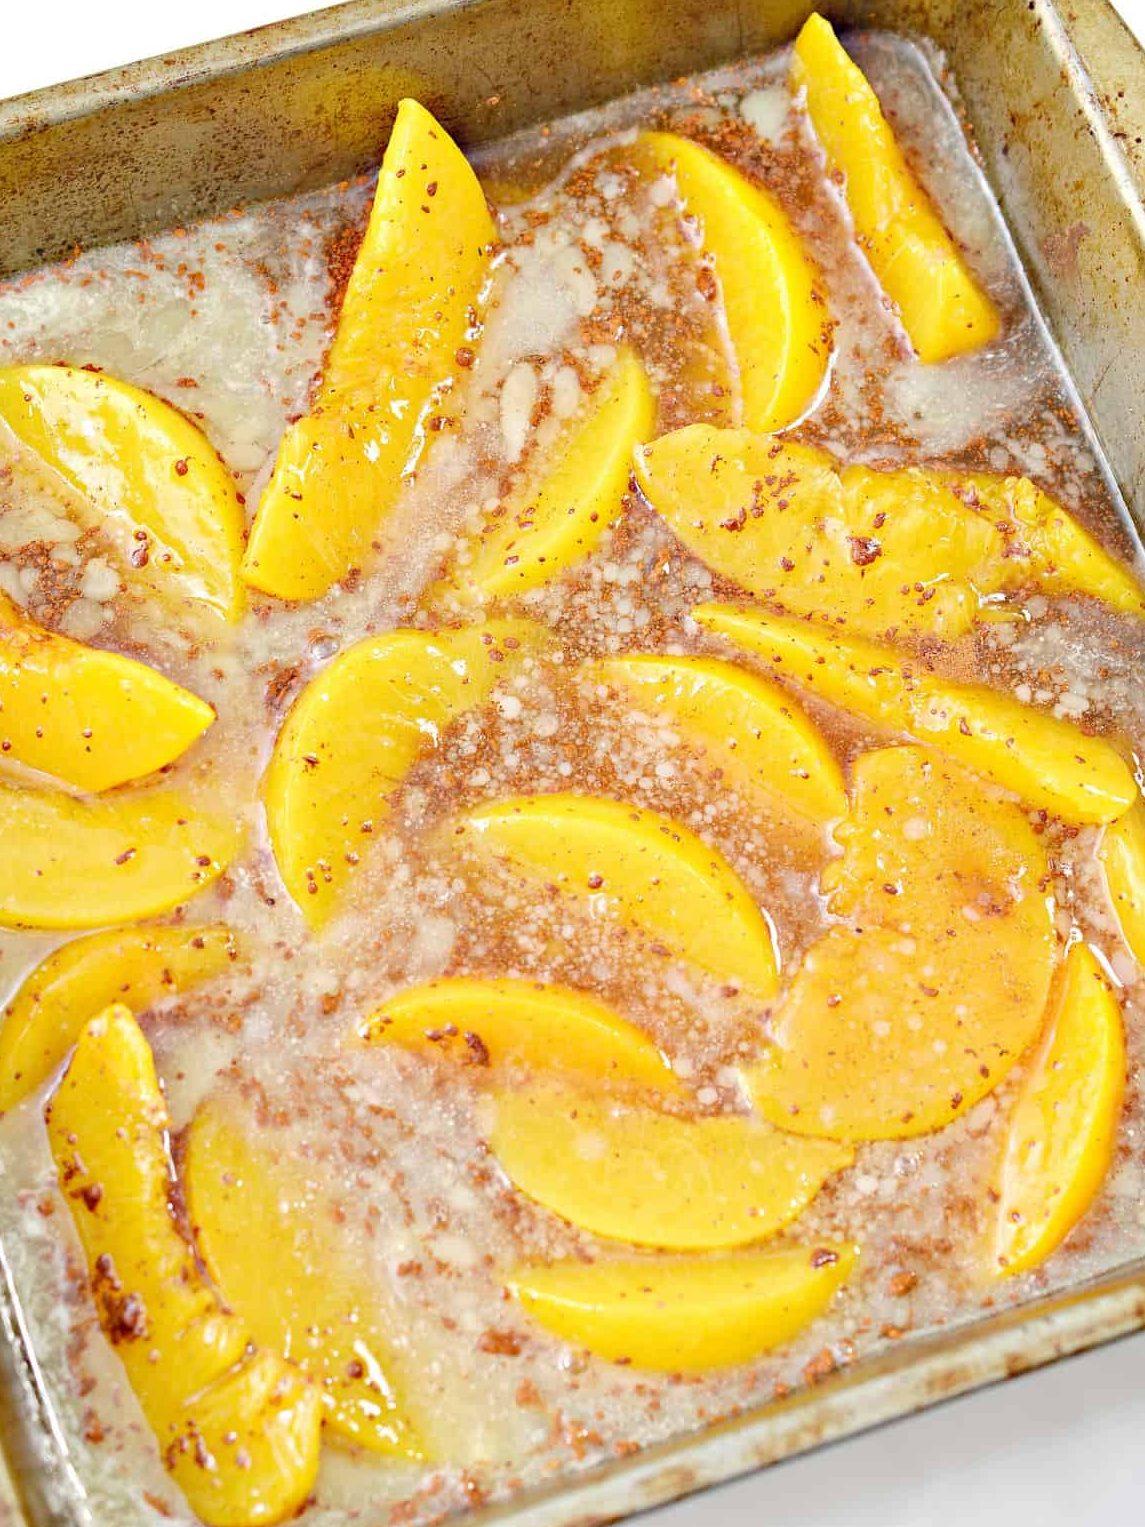 Place the peach mixture into the baking dish and cover with the cake crumbles, ¼ cup of sliced cold butter, and pecans. Bake for 25-30 minutes and let cool.